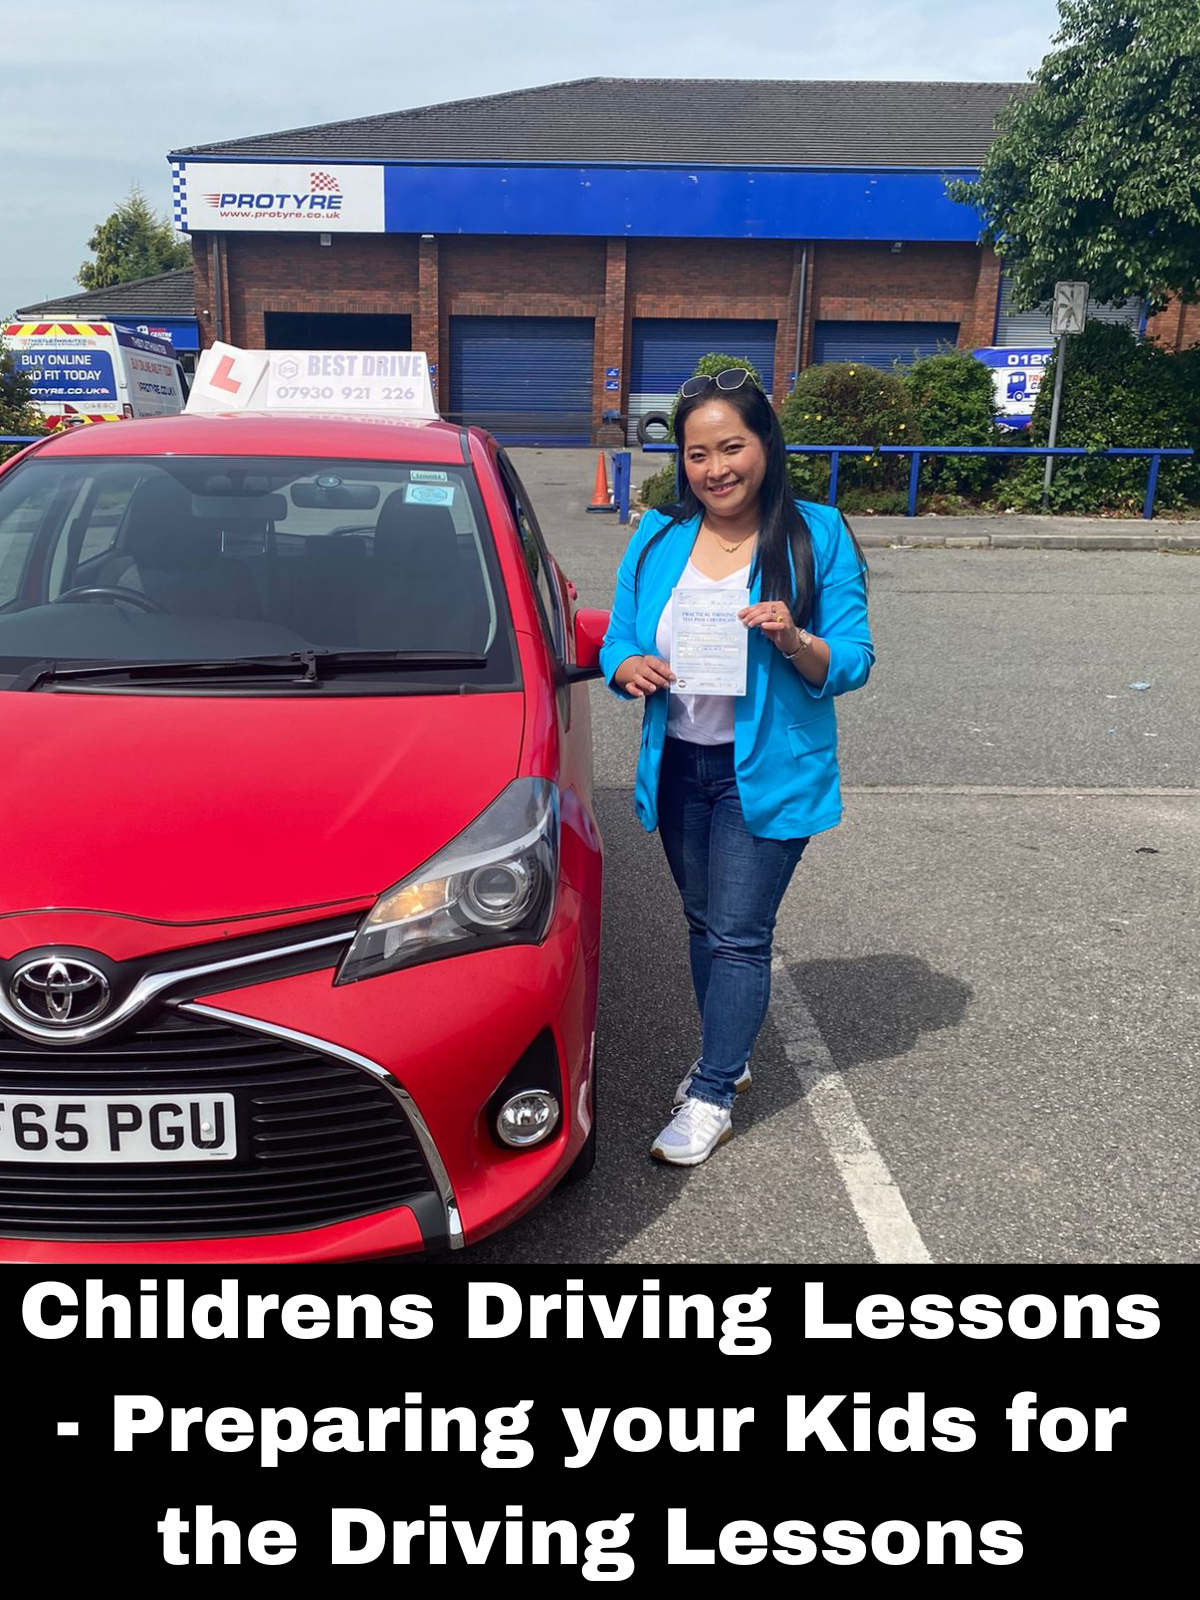 Childrens Driving Lessons - Preparing your Kids for the Driving Lessons